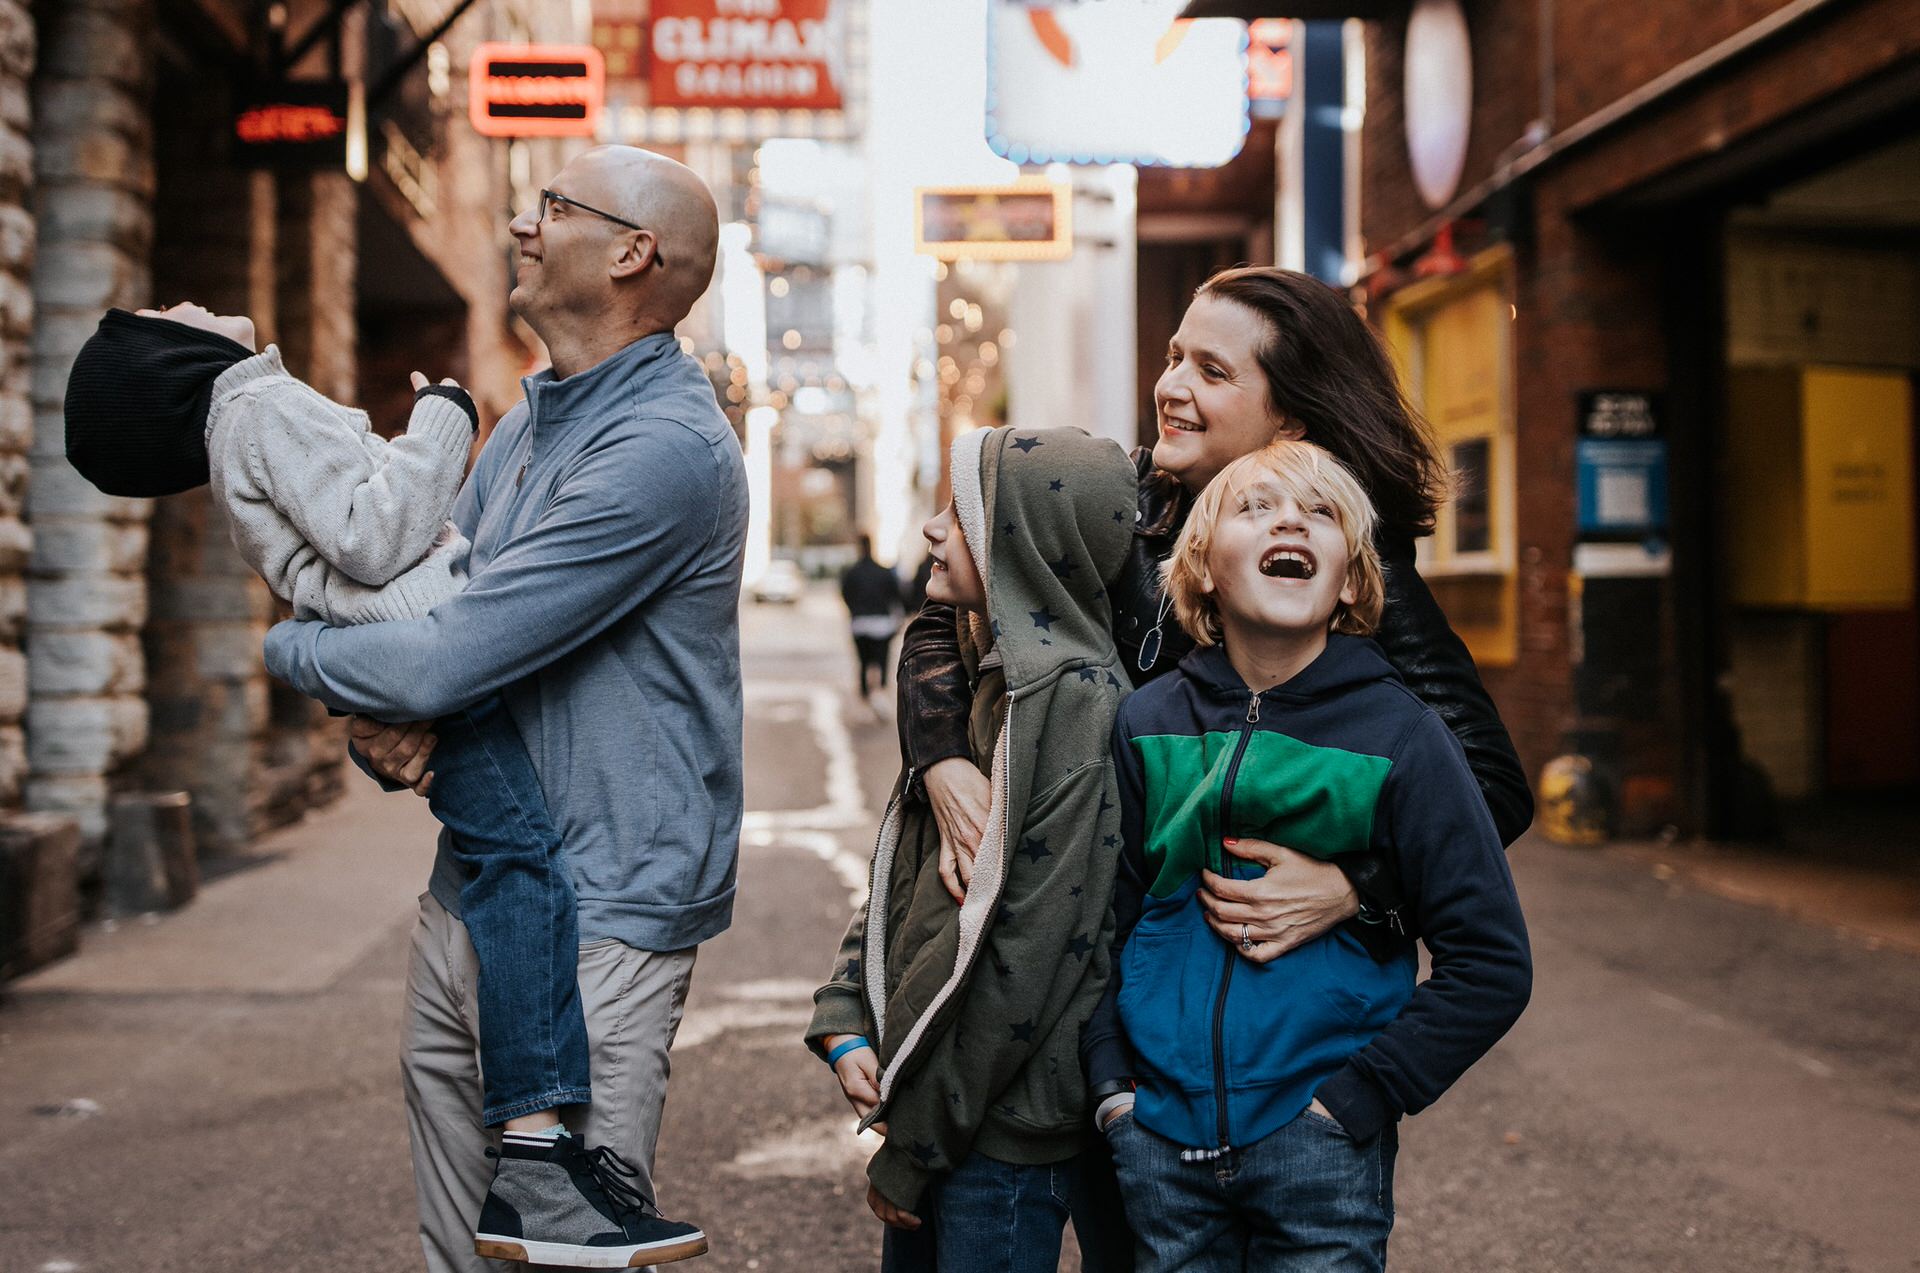 A family is laughing while standing on a street in Downtown Portland, capturing the joyful moments during their family photo session.